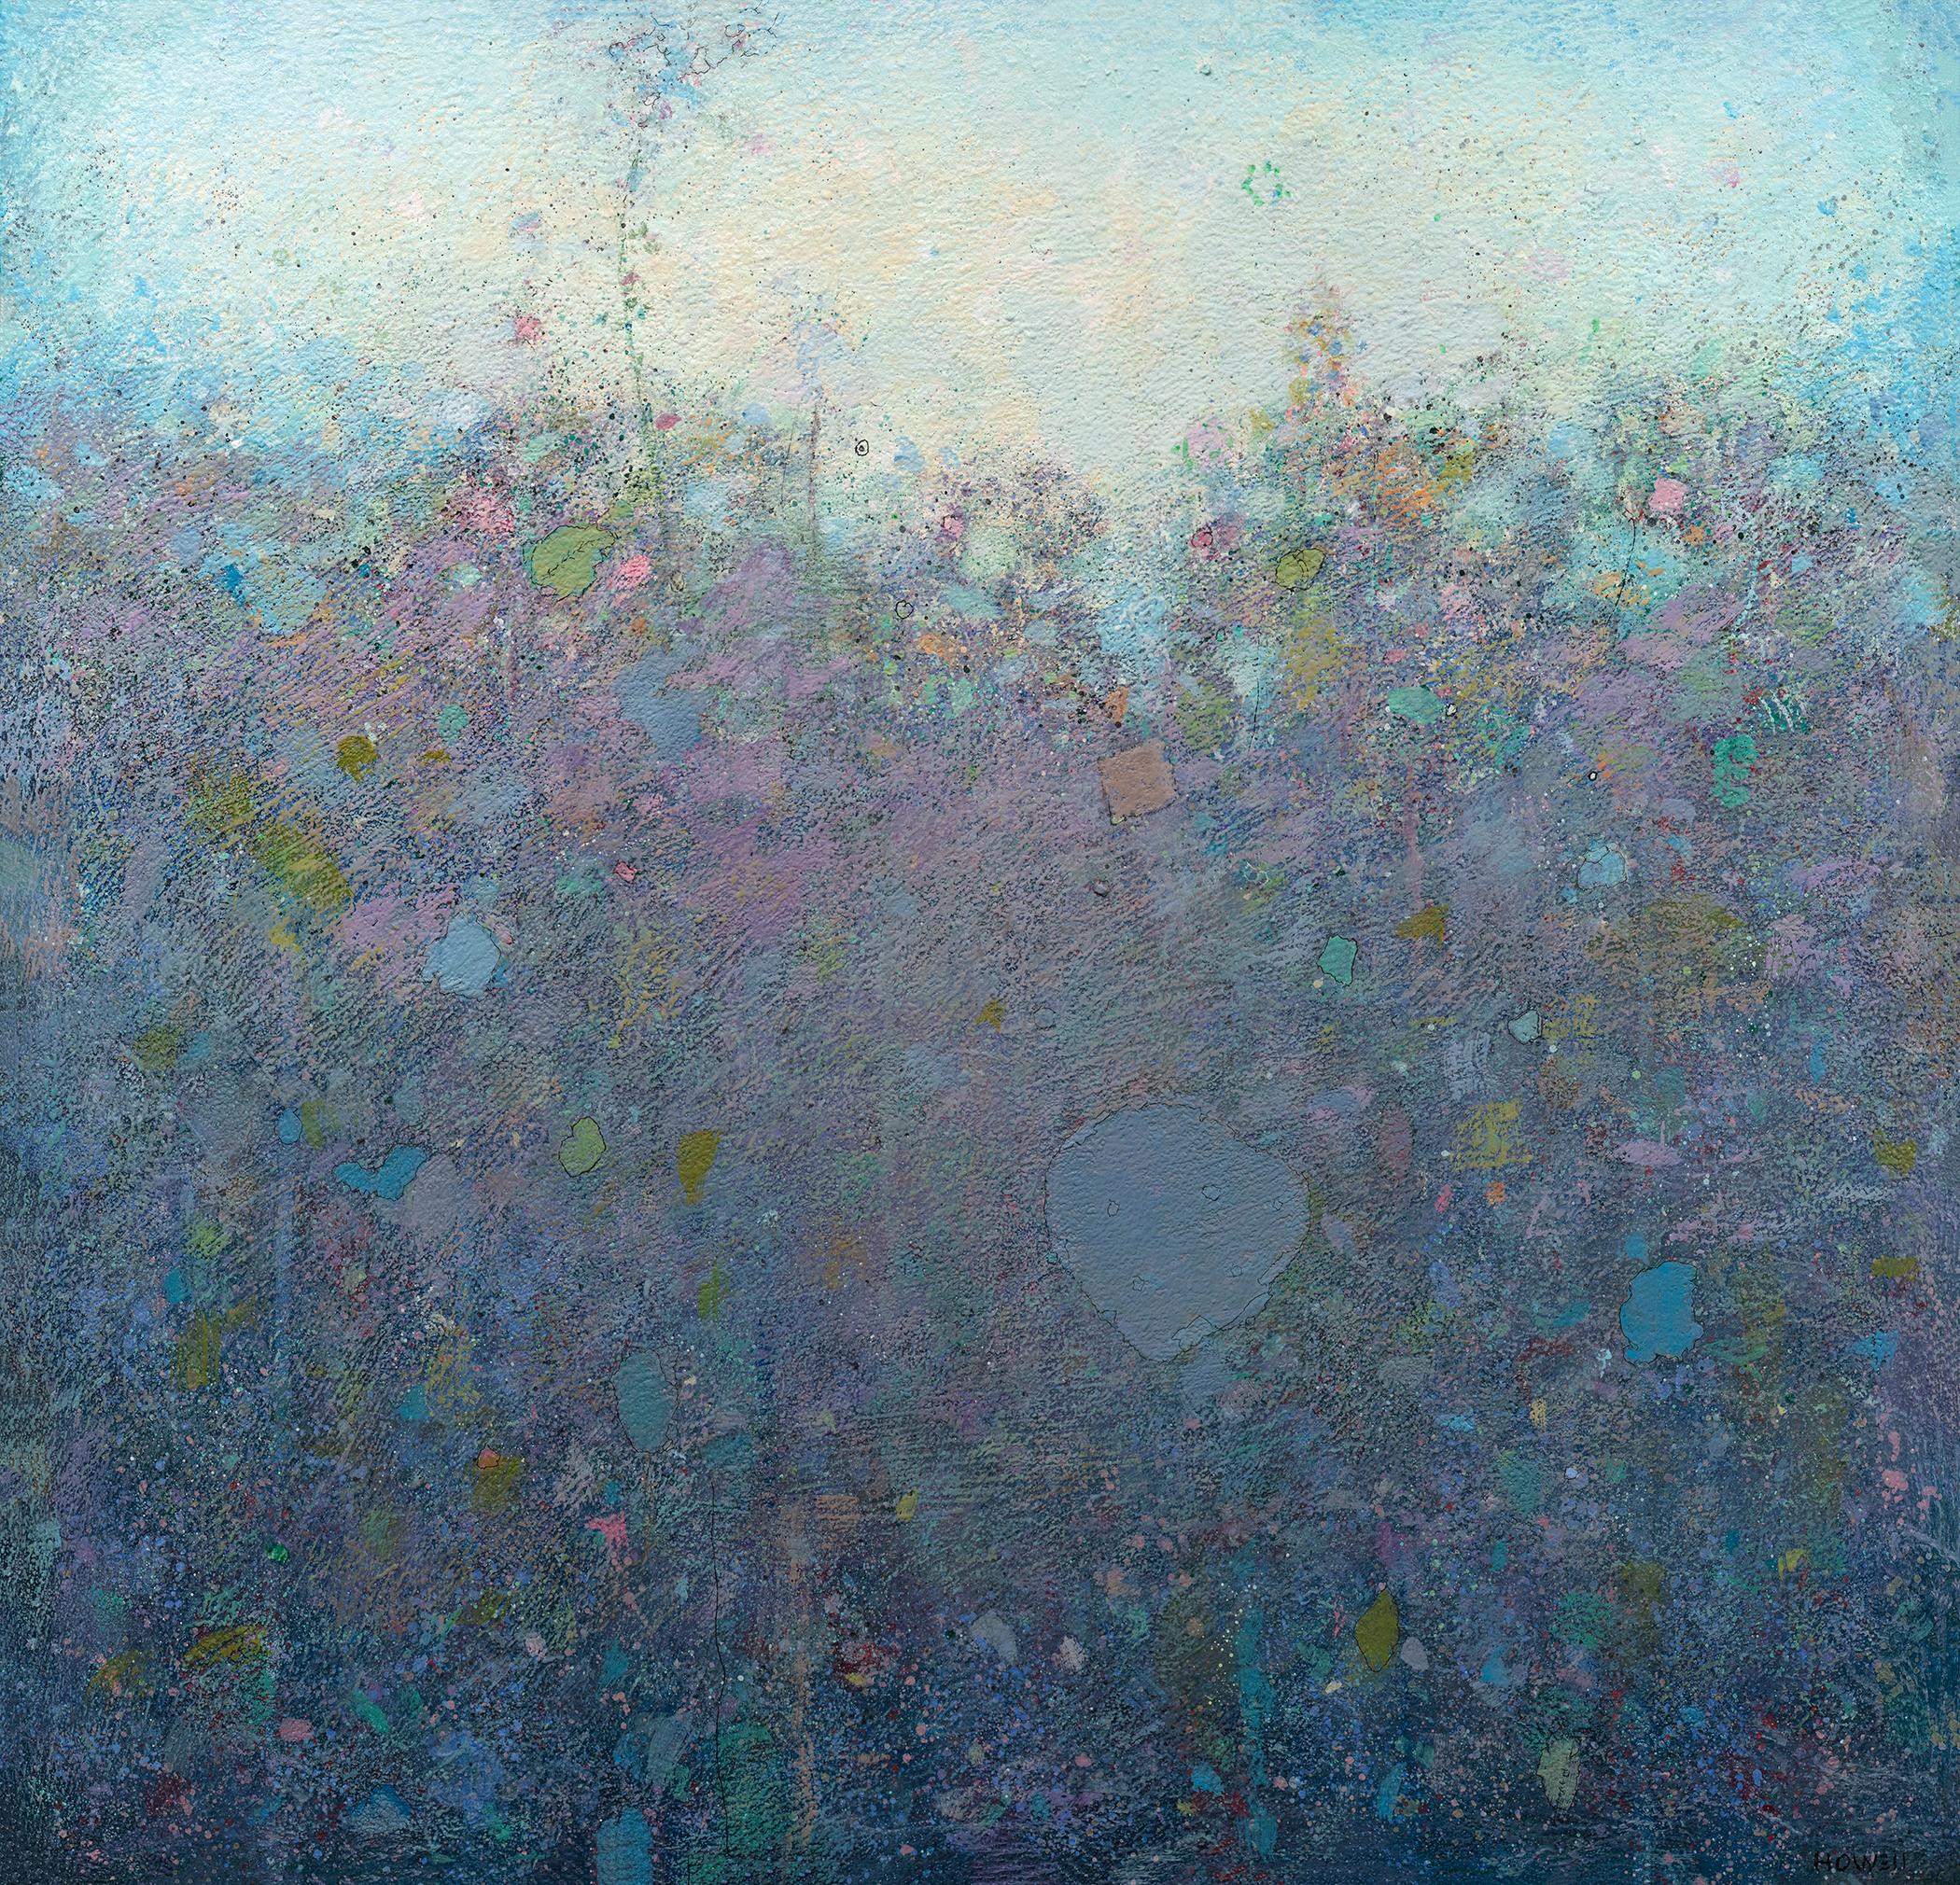 This abstract limited edition print by Elwood Howell features a cool, unique palette. Shapes that resemble thick foliage form a loose horizon line, with deep blue, violet, green, and specks of pink forming the bottom area of the piece. Above is a